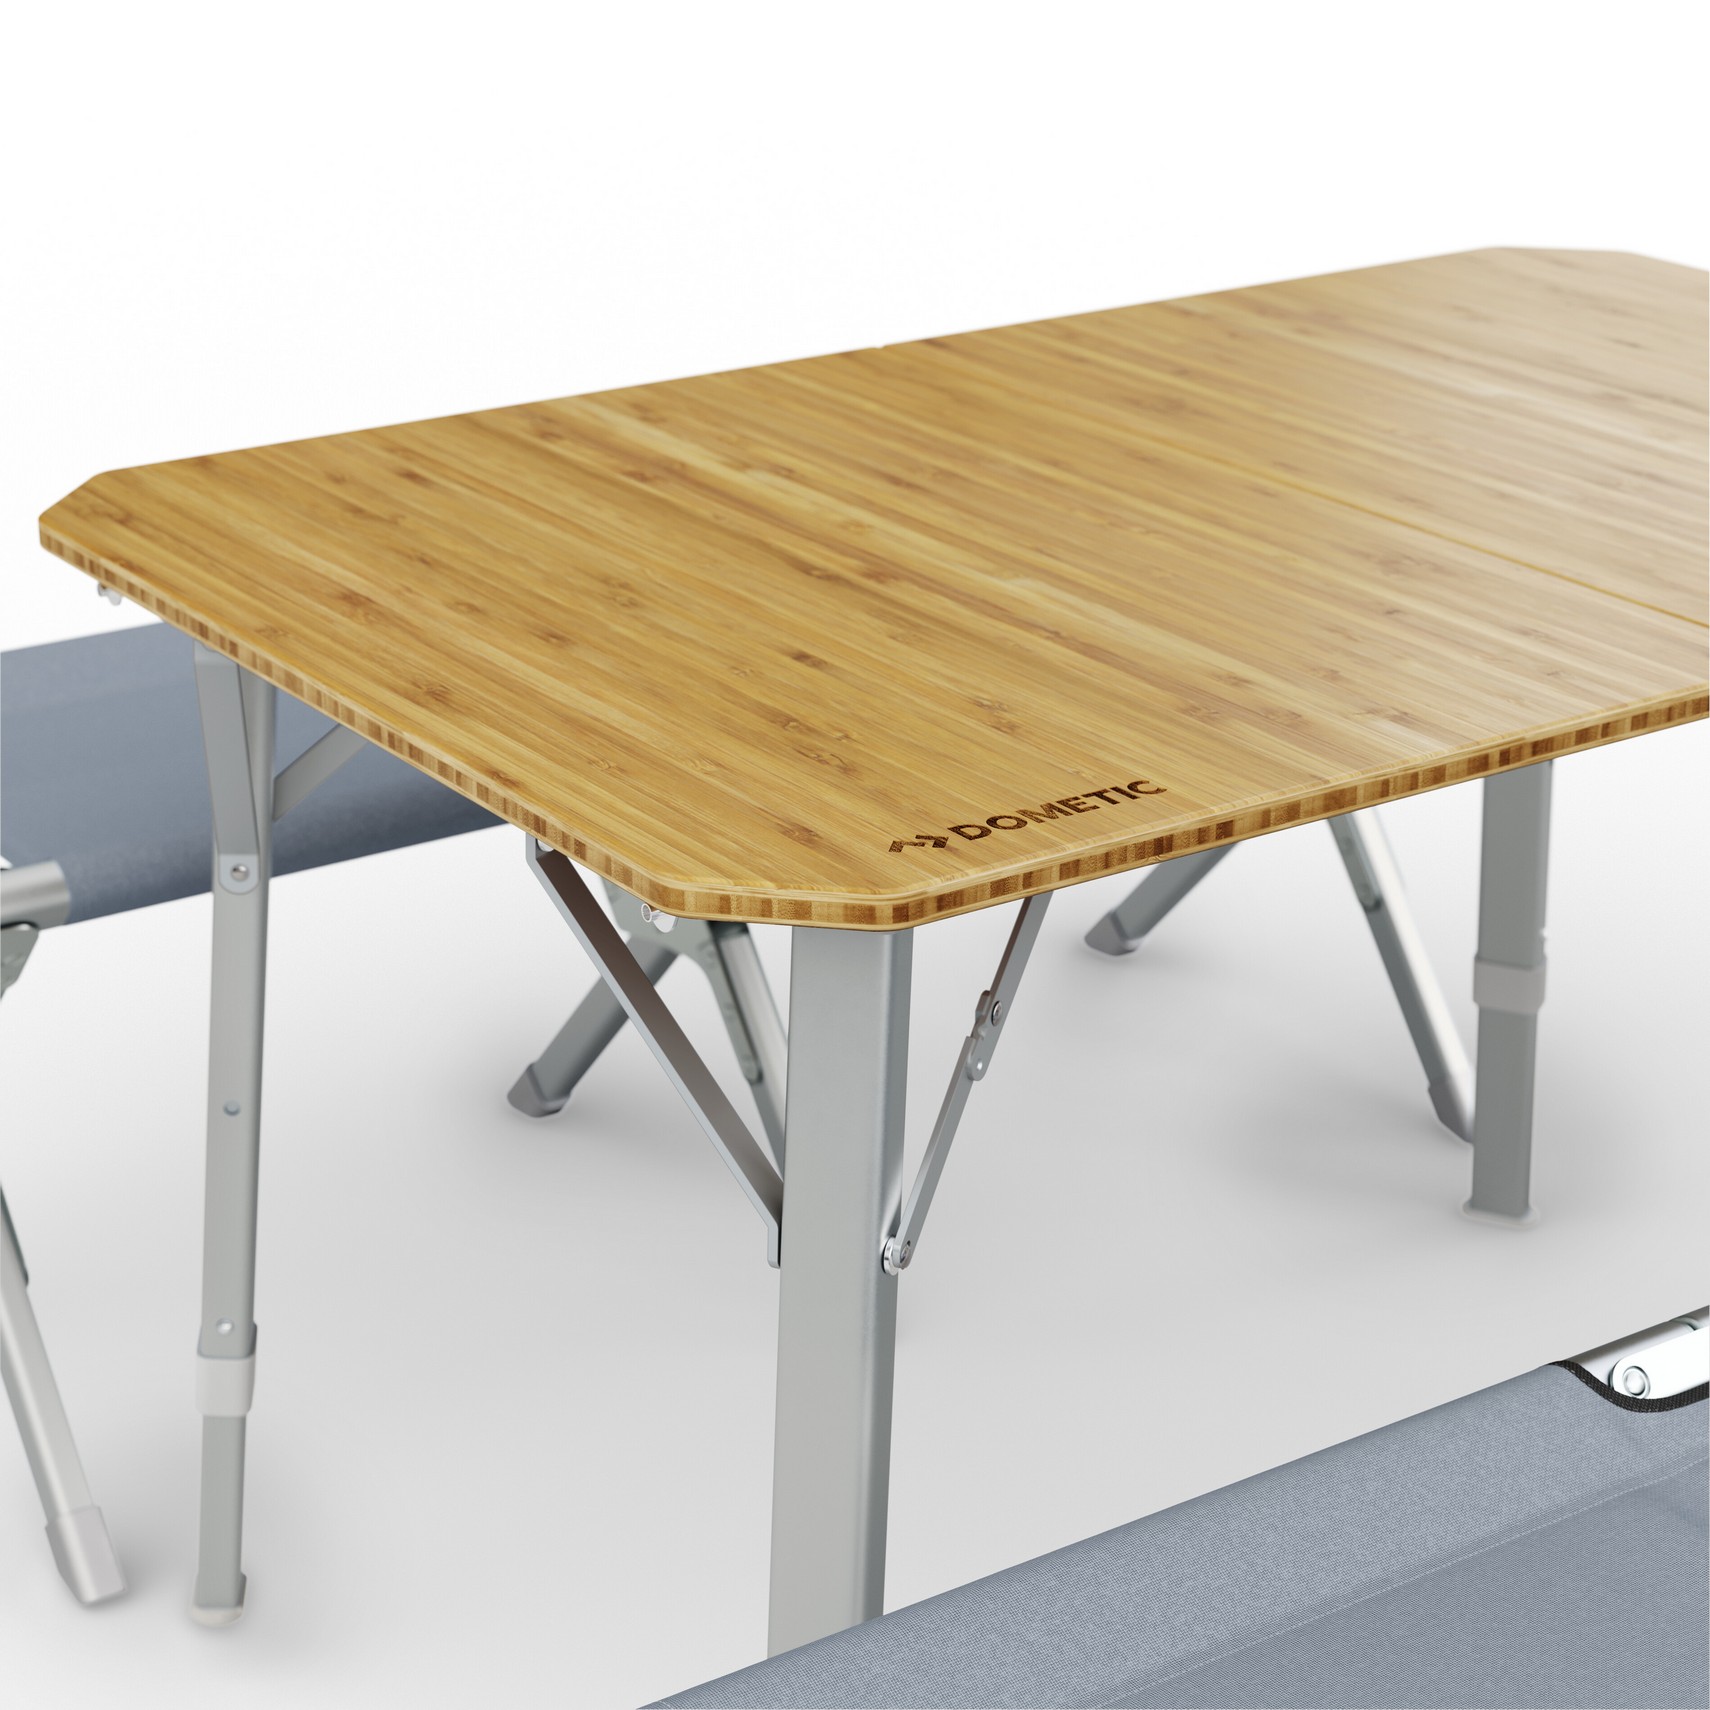 Dometic "Compact Camp Table" - bamboo